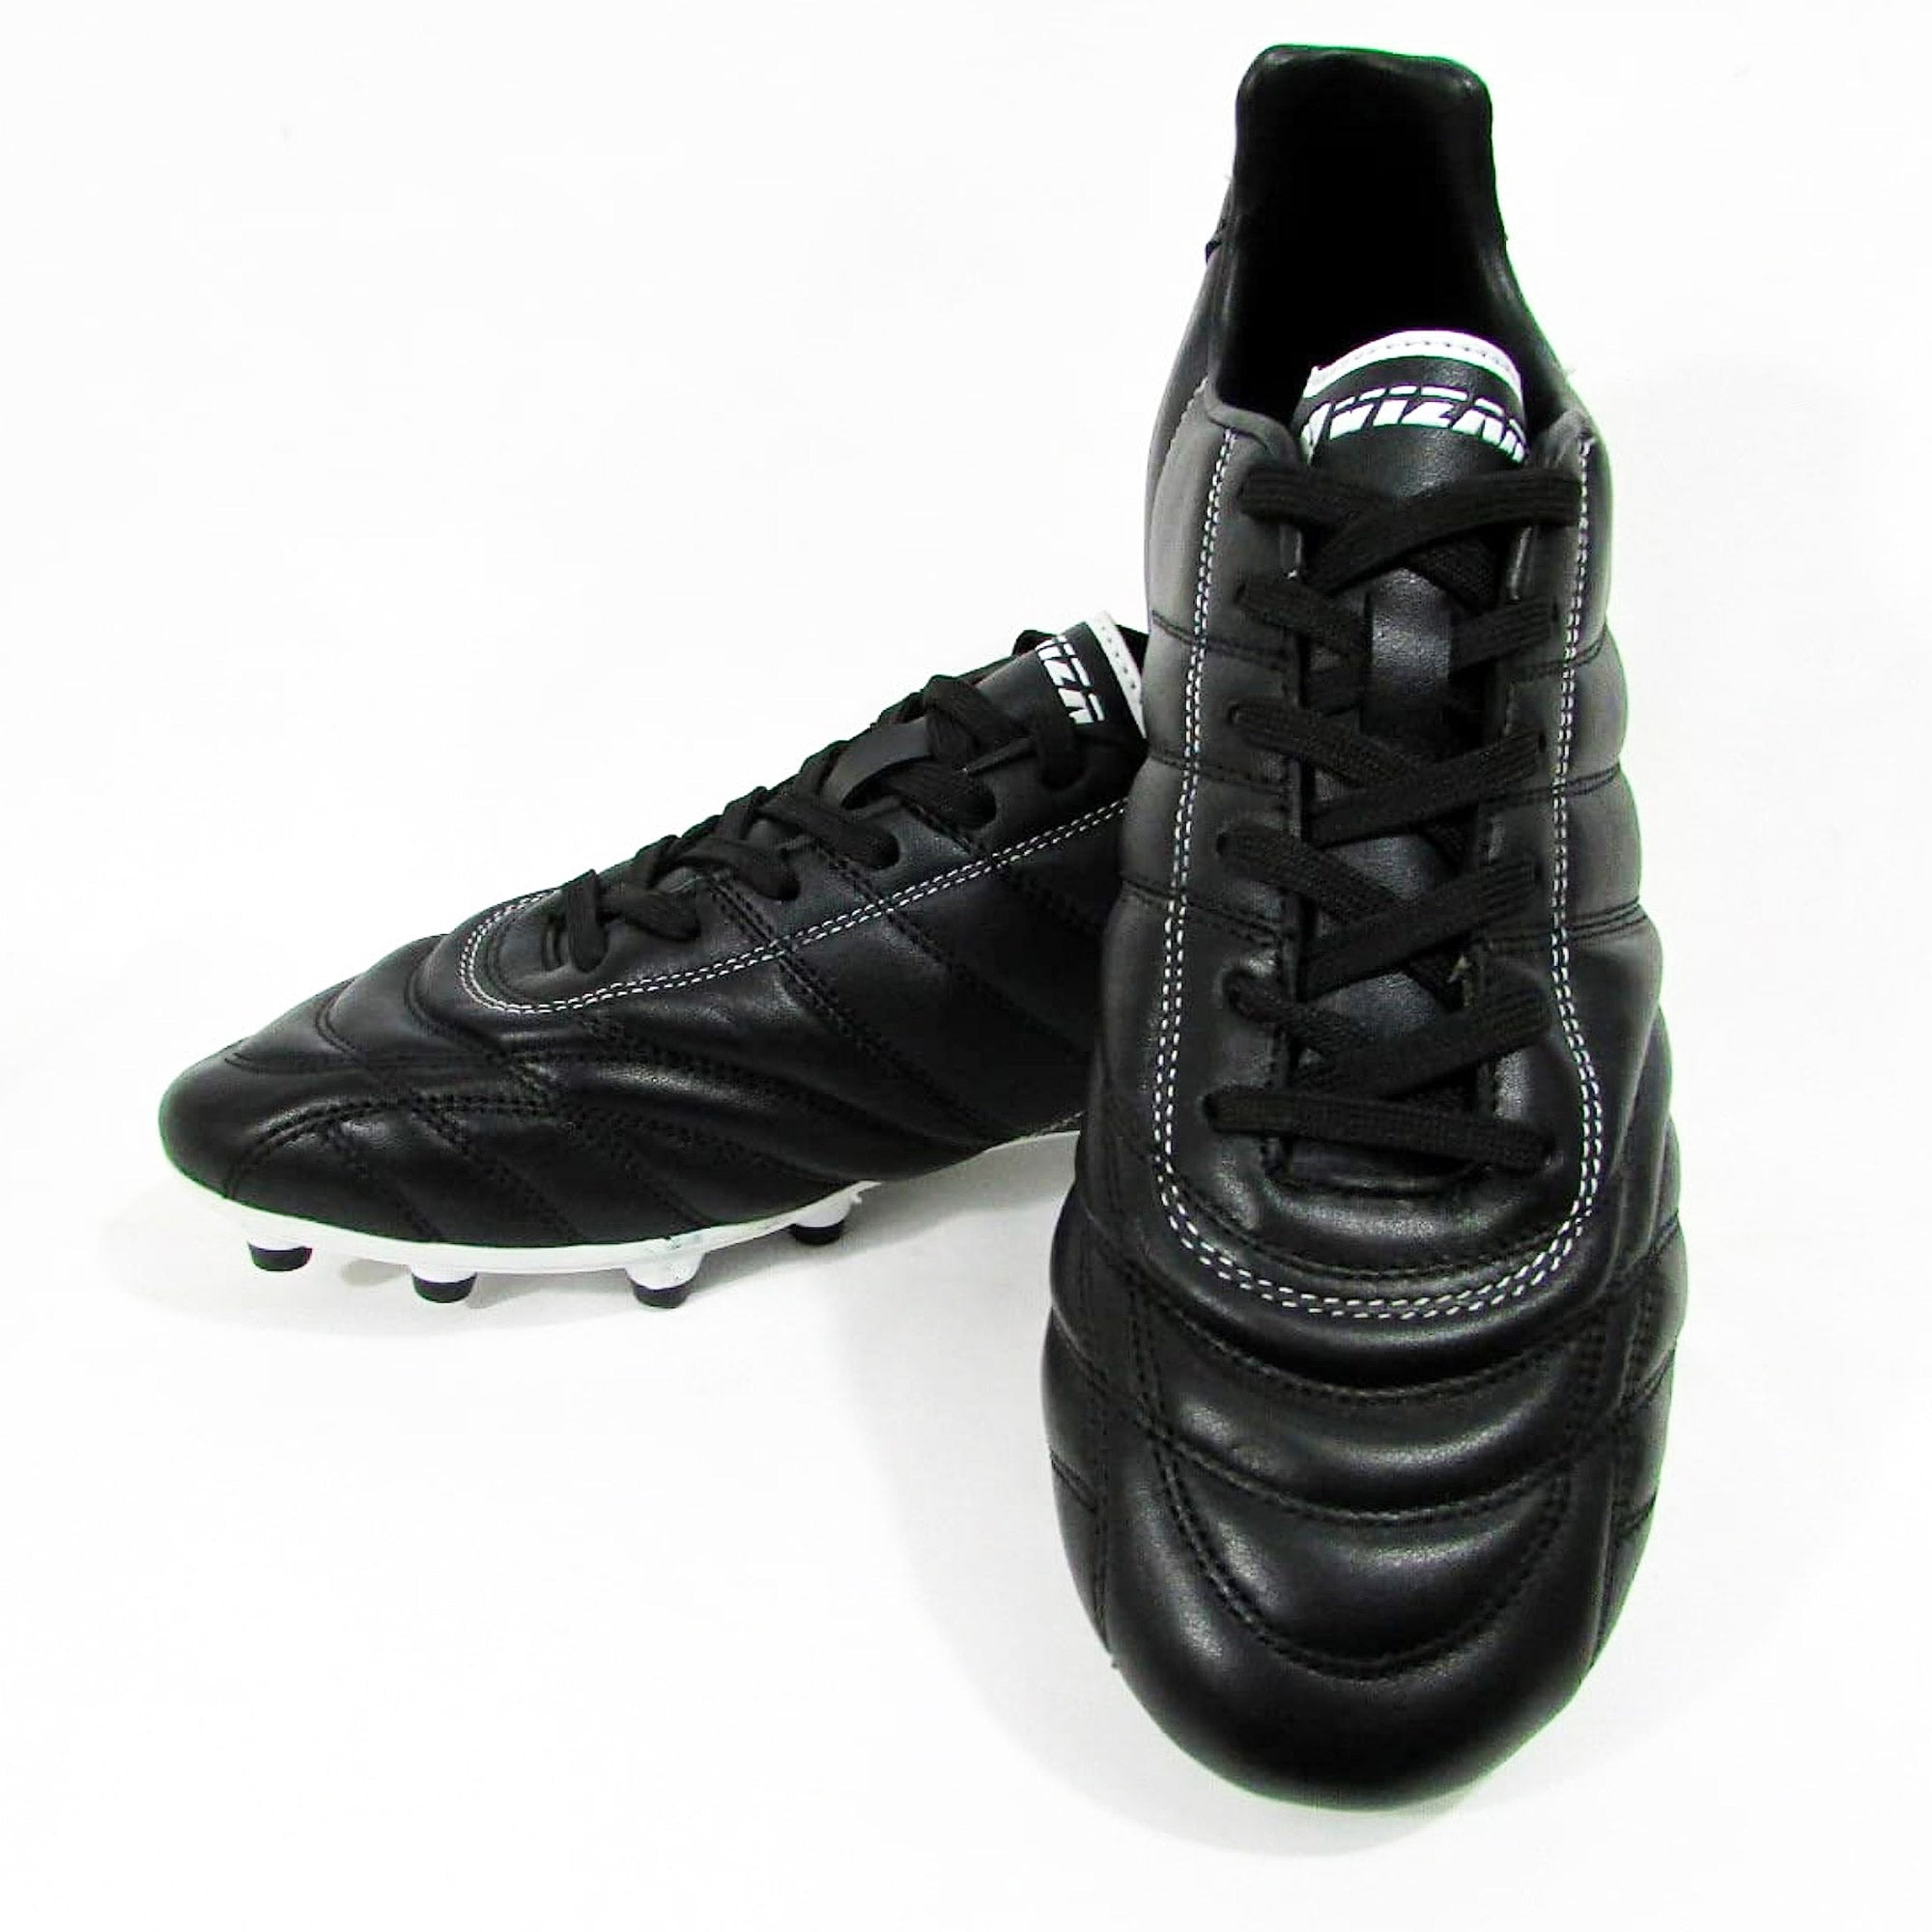 Classico Firm Ground Soccer Shoes - Black/White